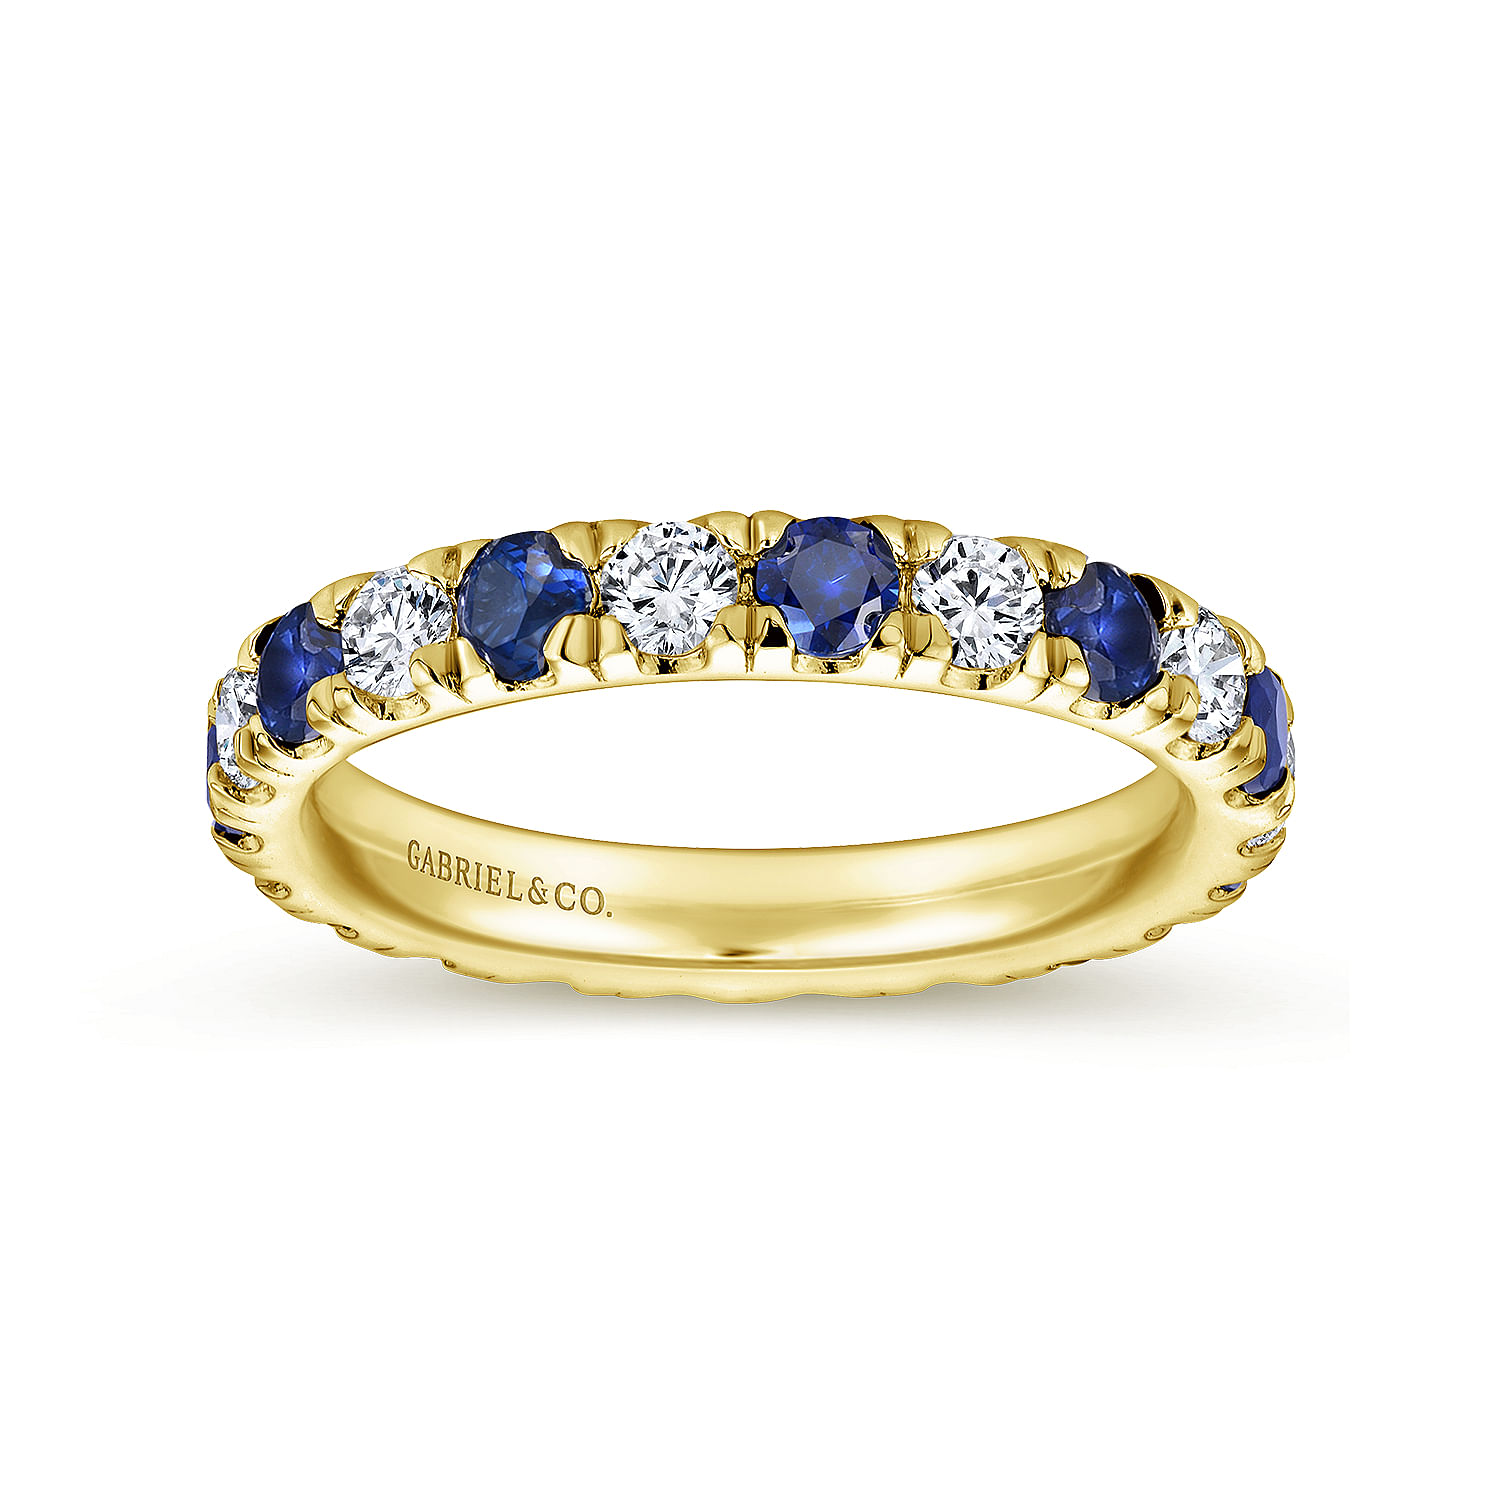 French Pavé  Eternity Sapphire and Diamond Ring in 14K Yellow Gold